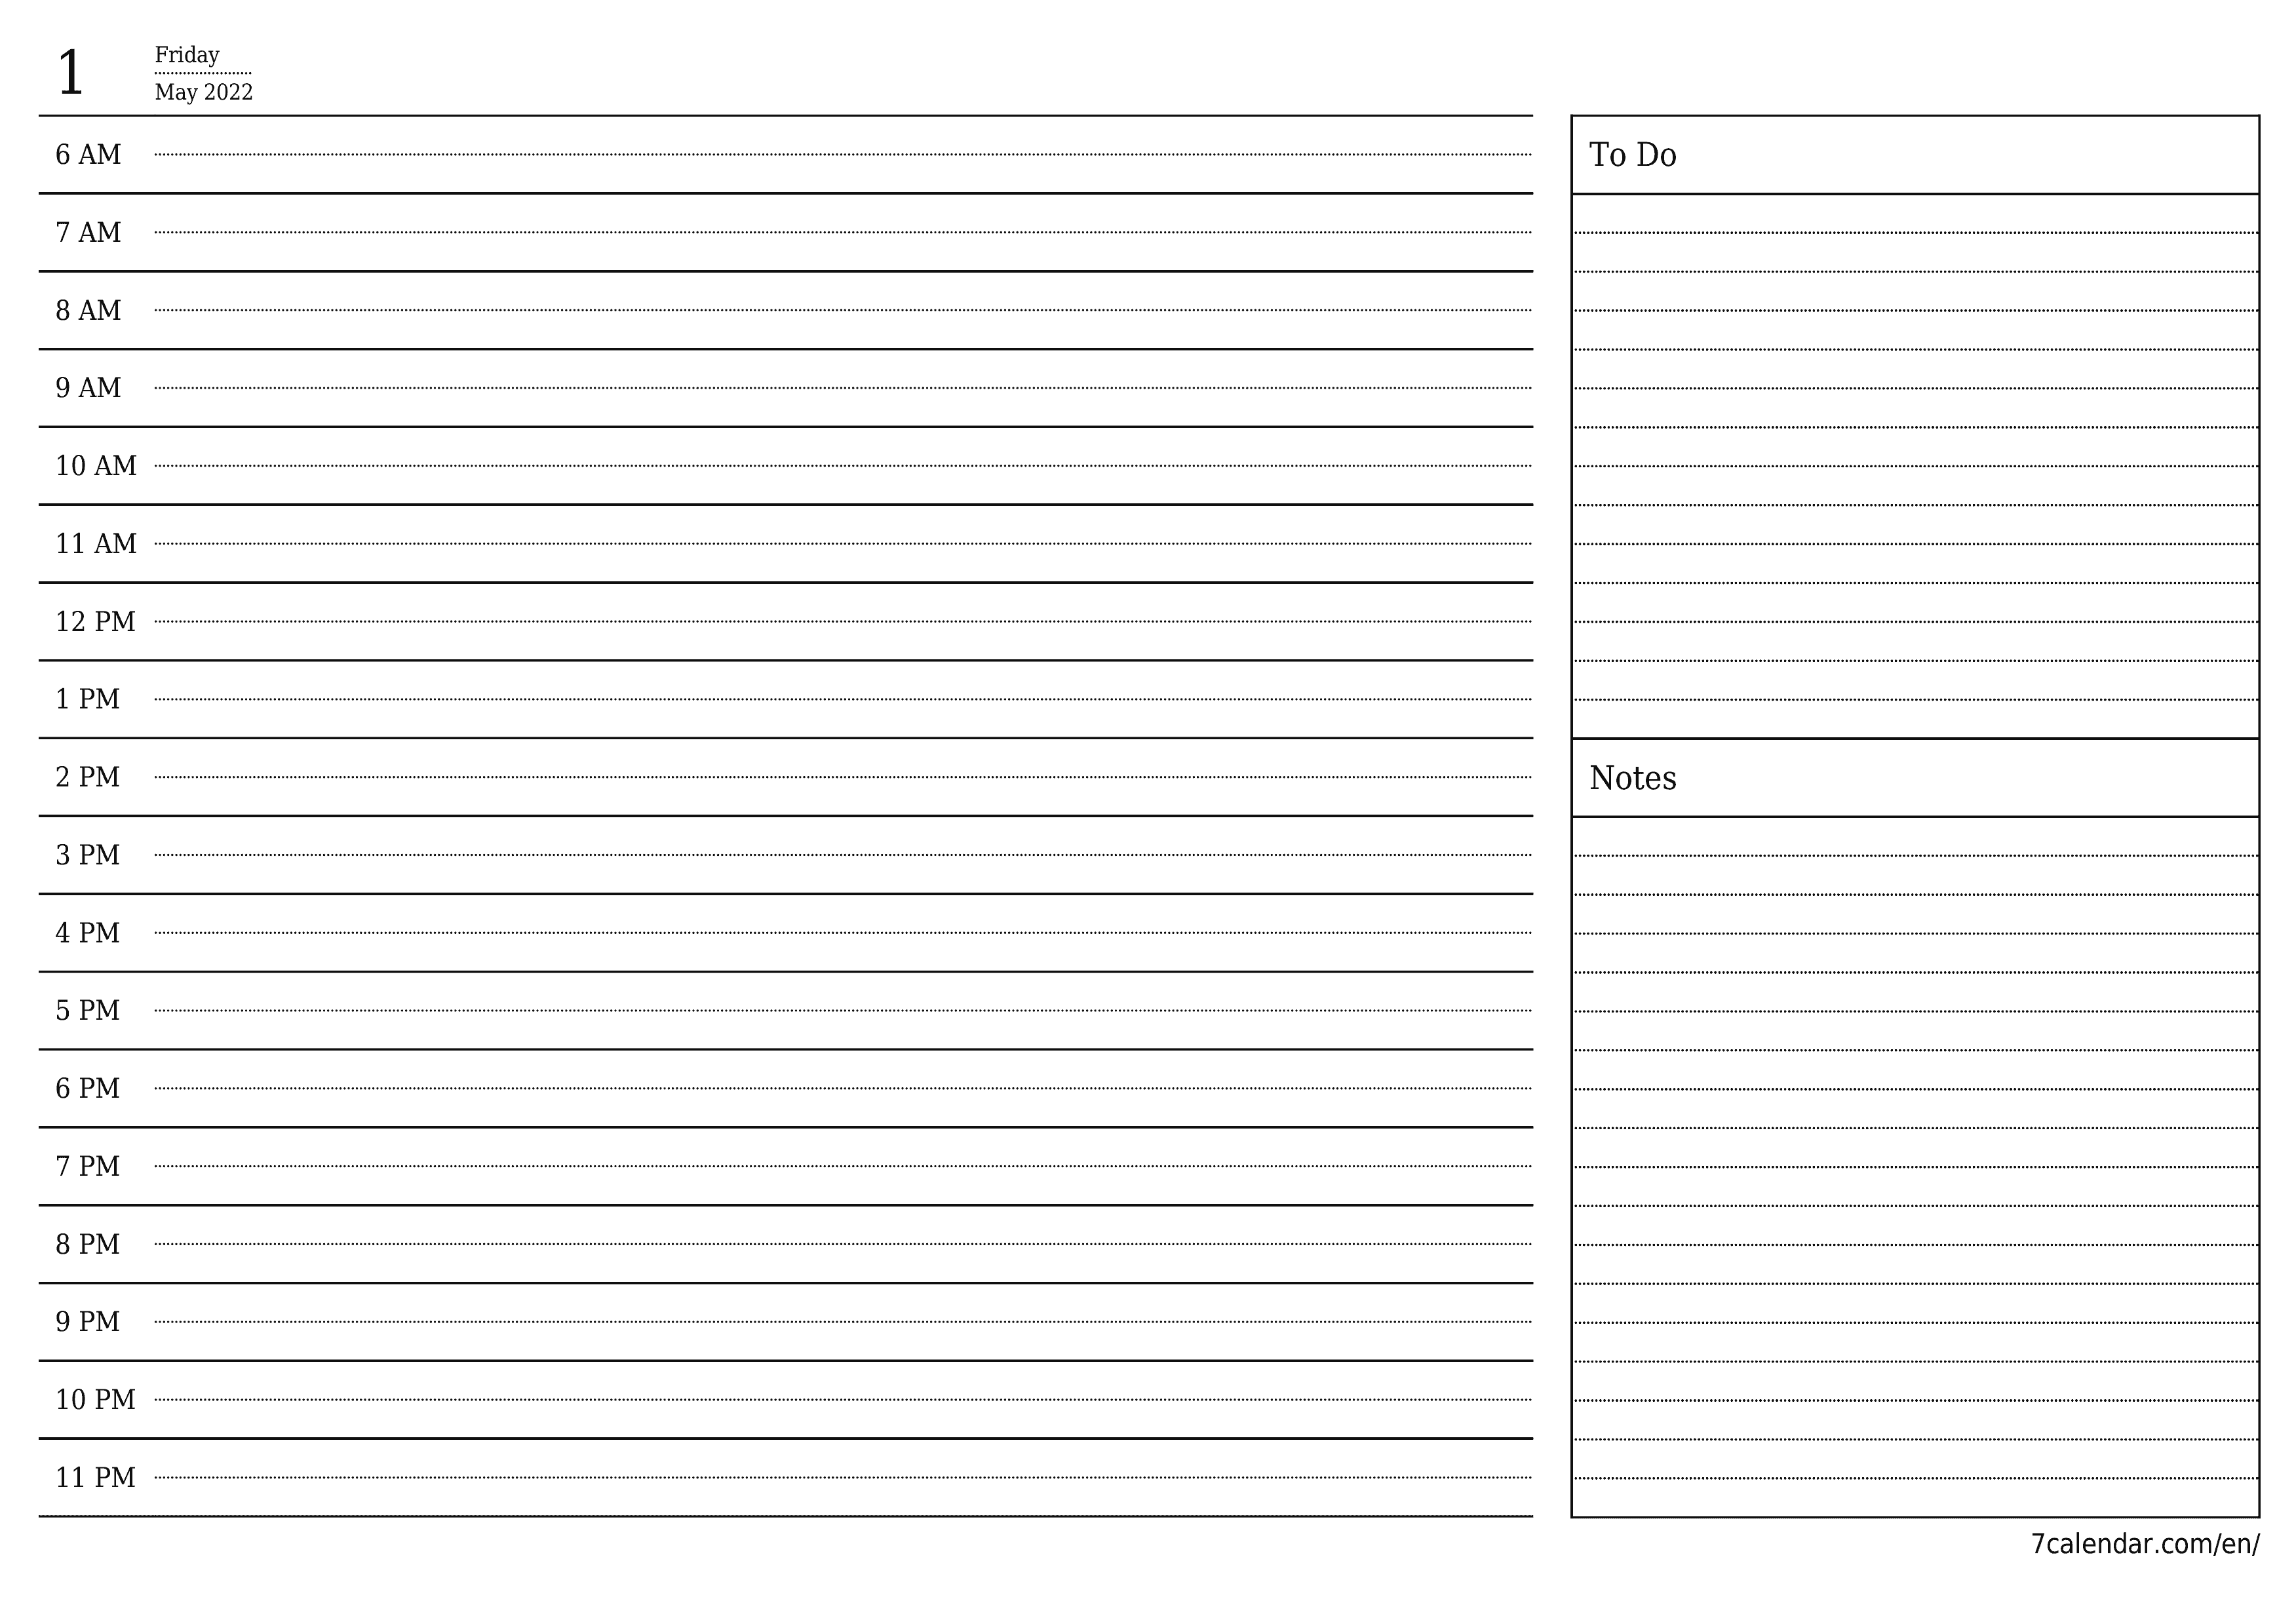 Blank daily printable calendar and planner for day May 2022 with notes, save and print to PDF PNG English - 7calendar.com